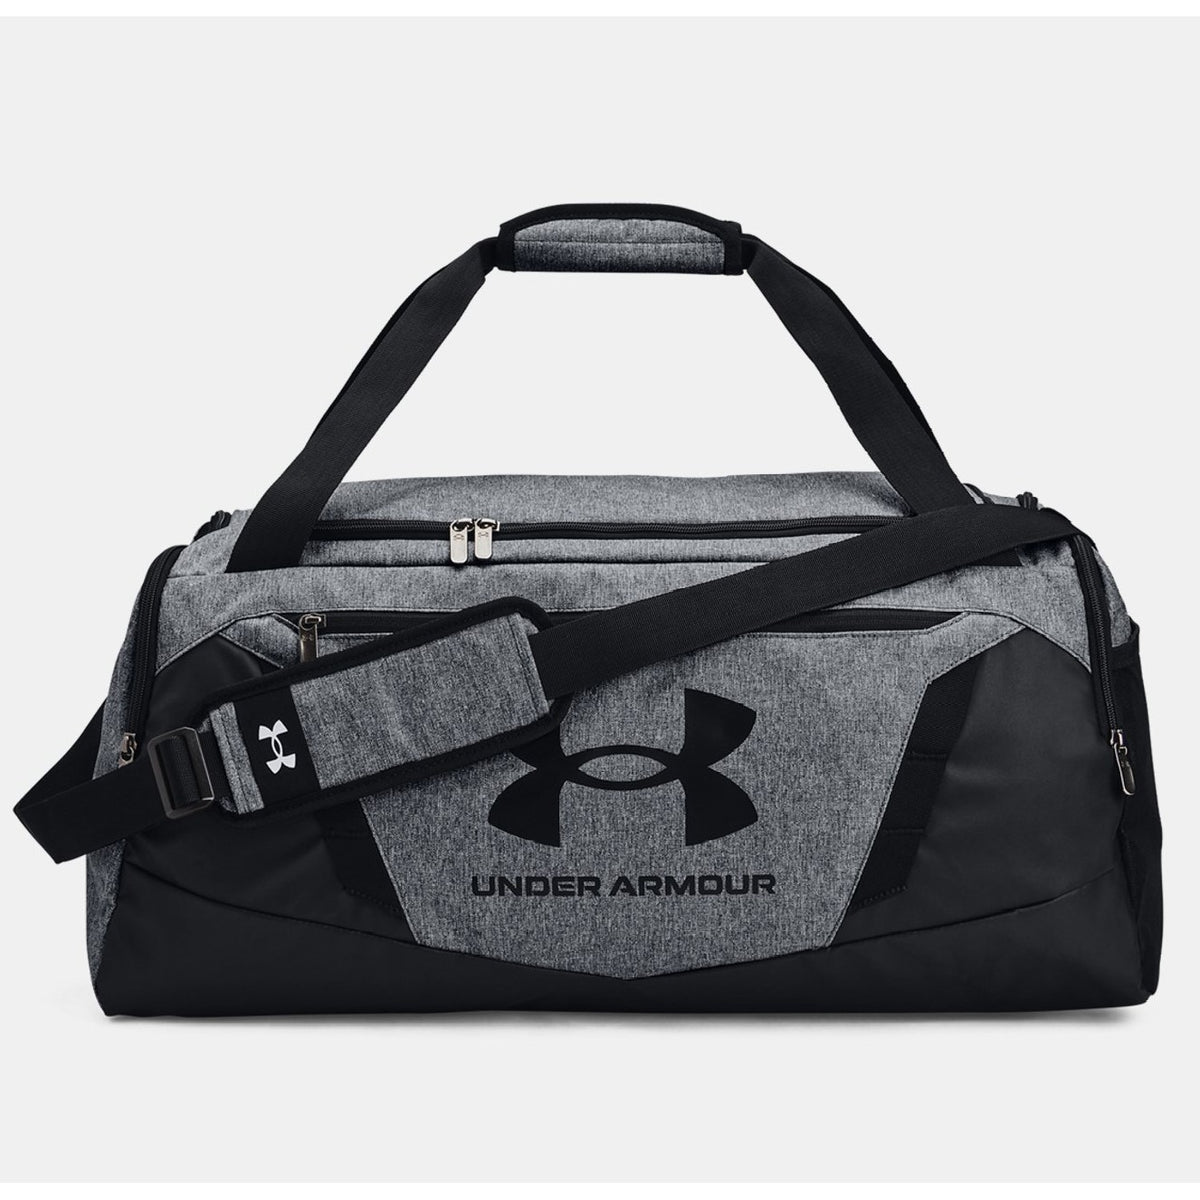 Under Armour Undeniable 5.0 Md Duffle Bag (grey 012)